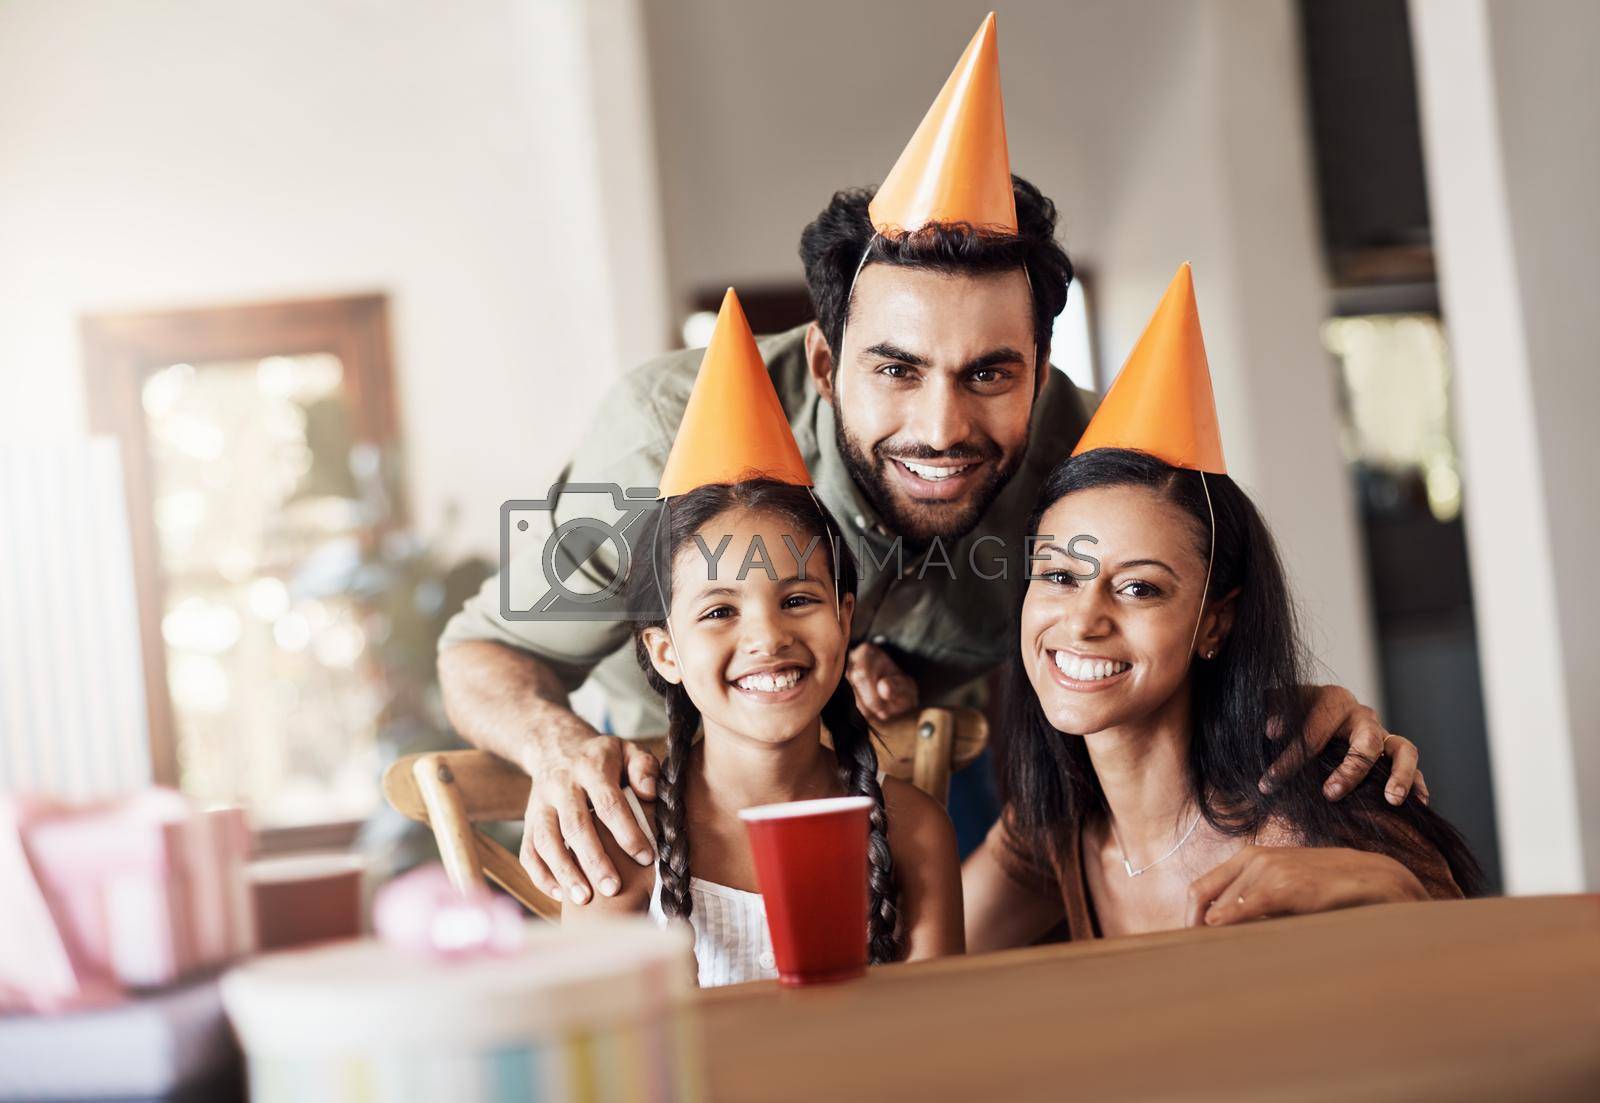 Royalty free image of Hip hip hooray, its someones birthday. Shot of a happy mother and father celebrating their daughters birthday at home. by YuriArcurs